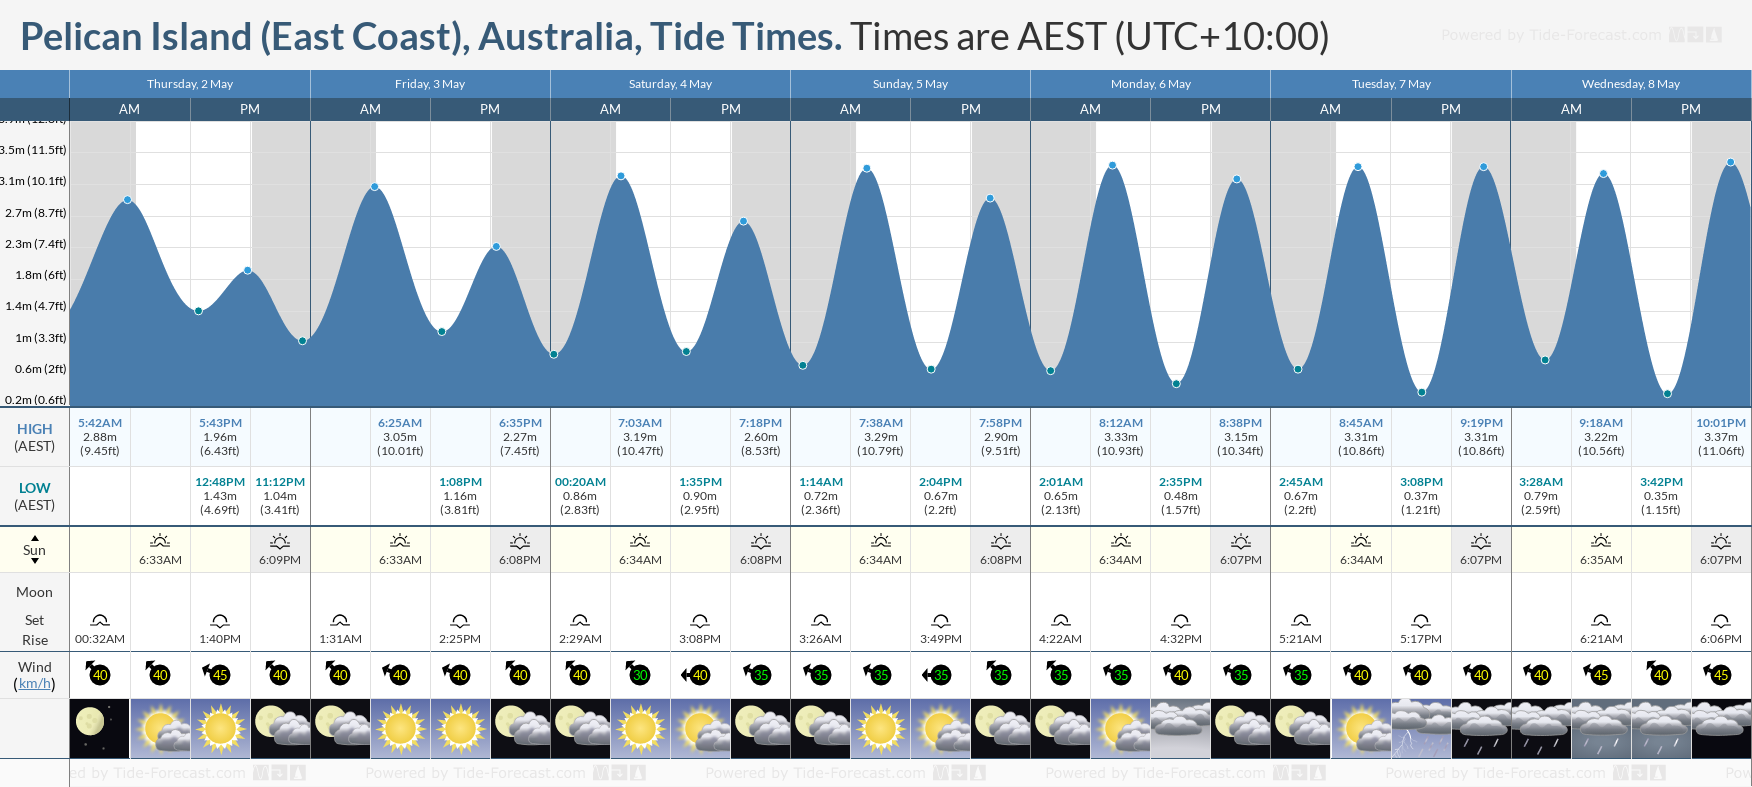 Pelican Island (East Coast), Australia Tide Chart including high and low tide tide times for the next 7 days